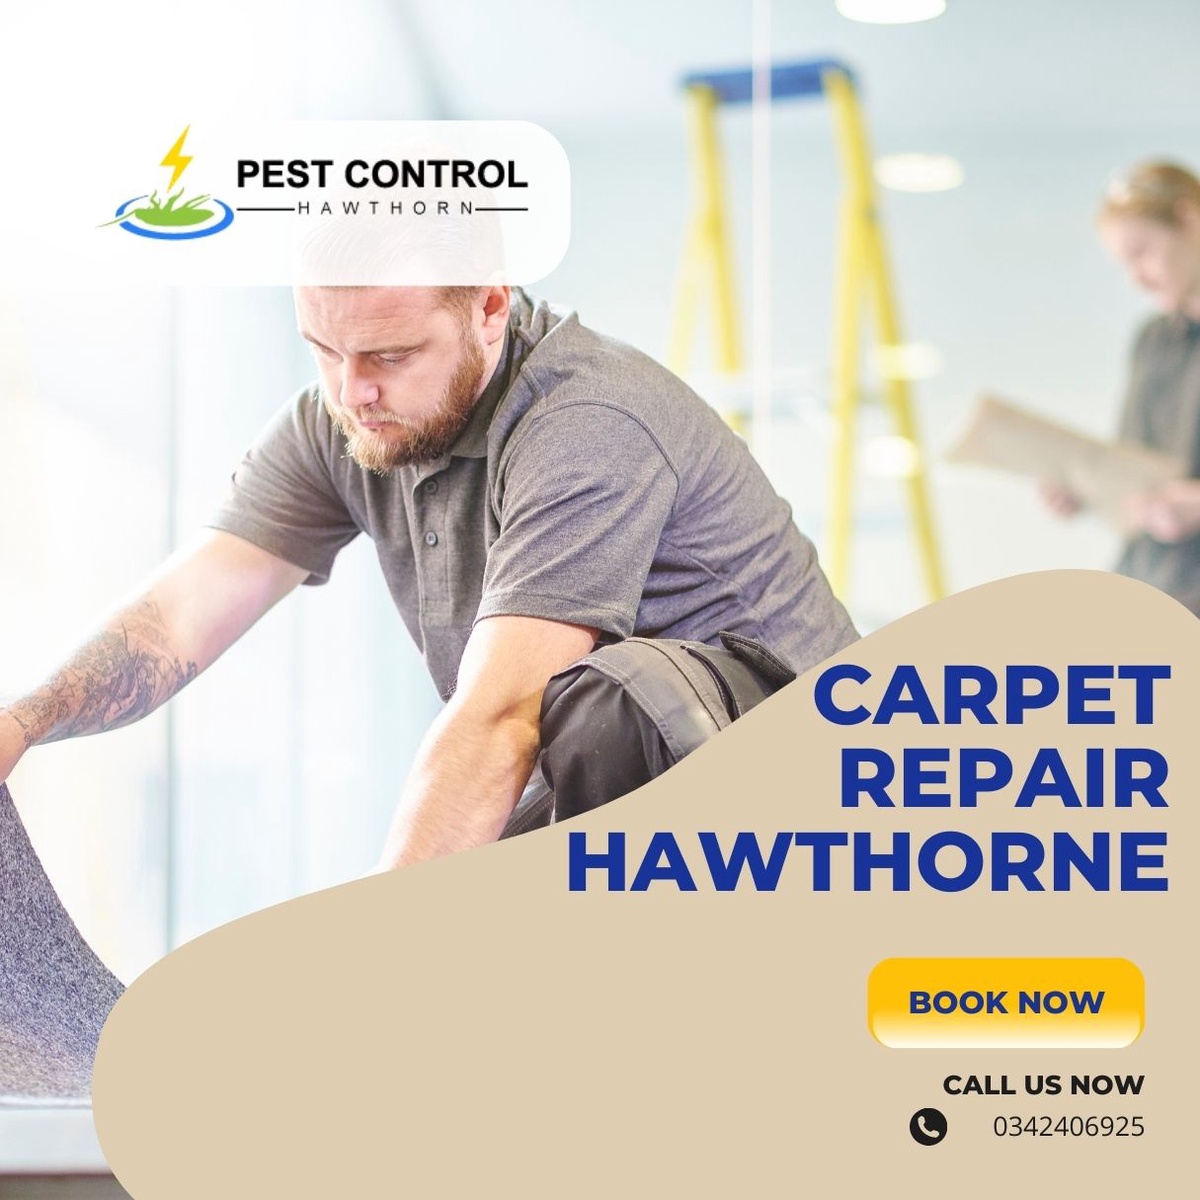 How Carpet Repair Services in Hawthorn Can Save You Money and Hassle